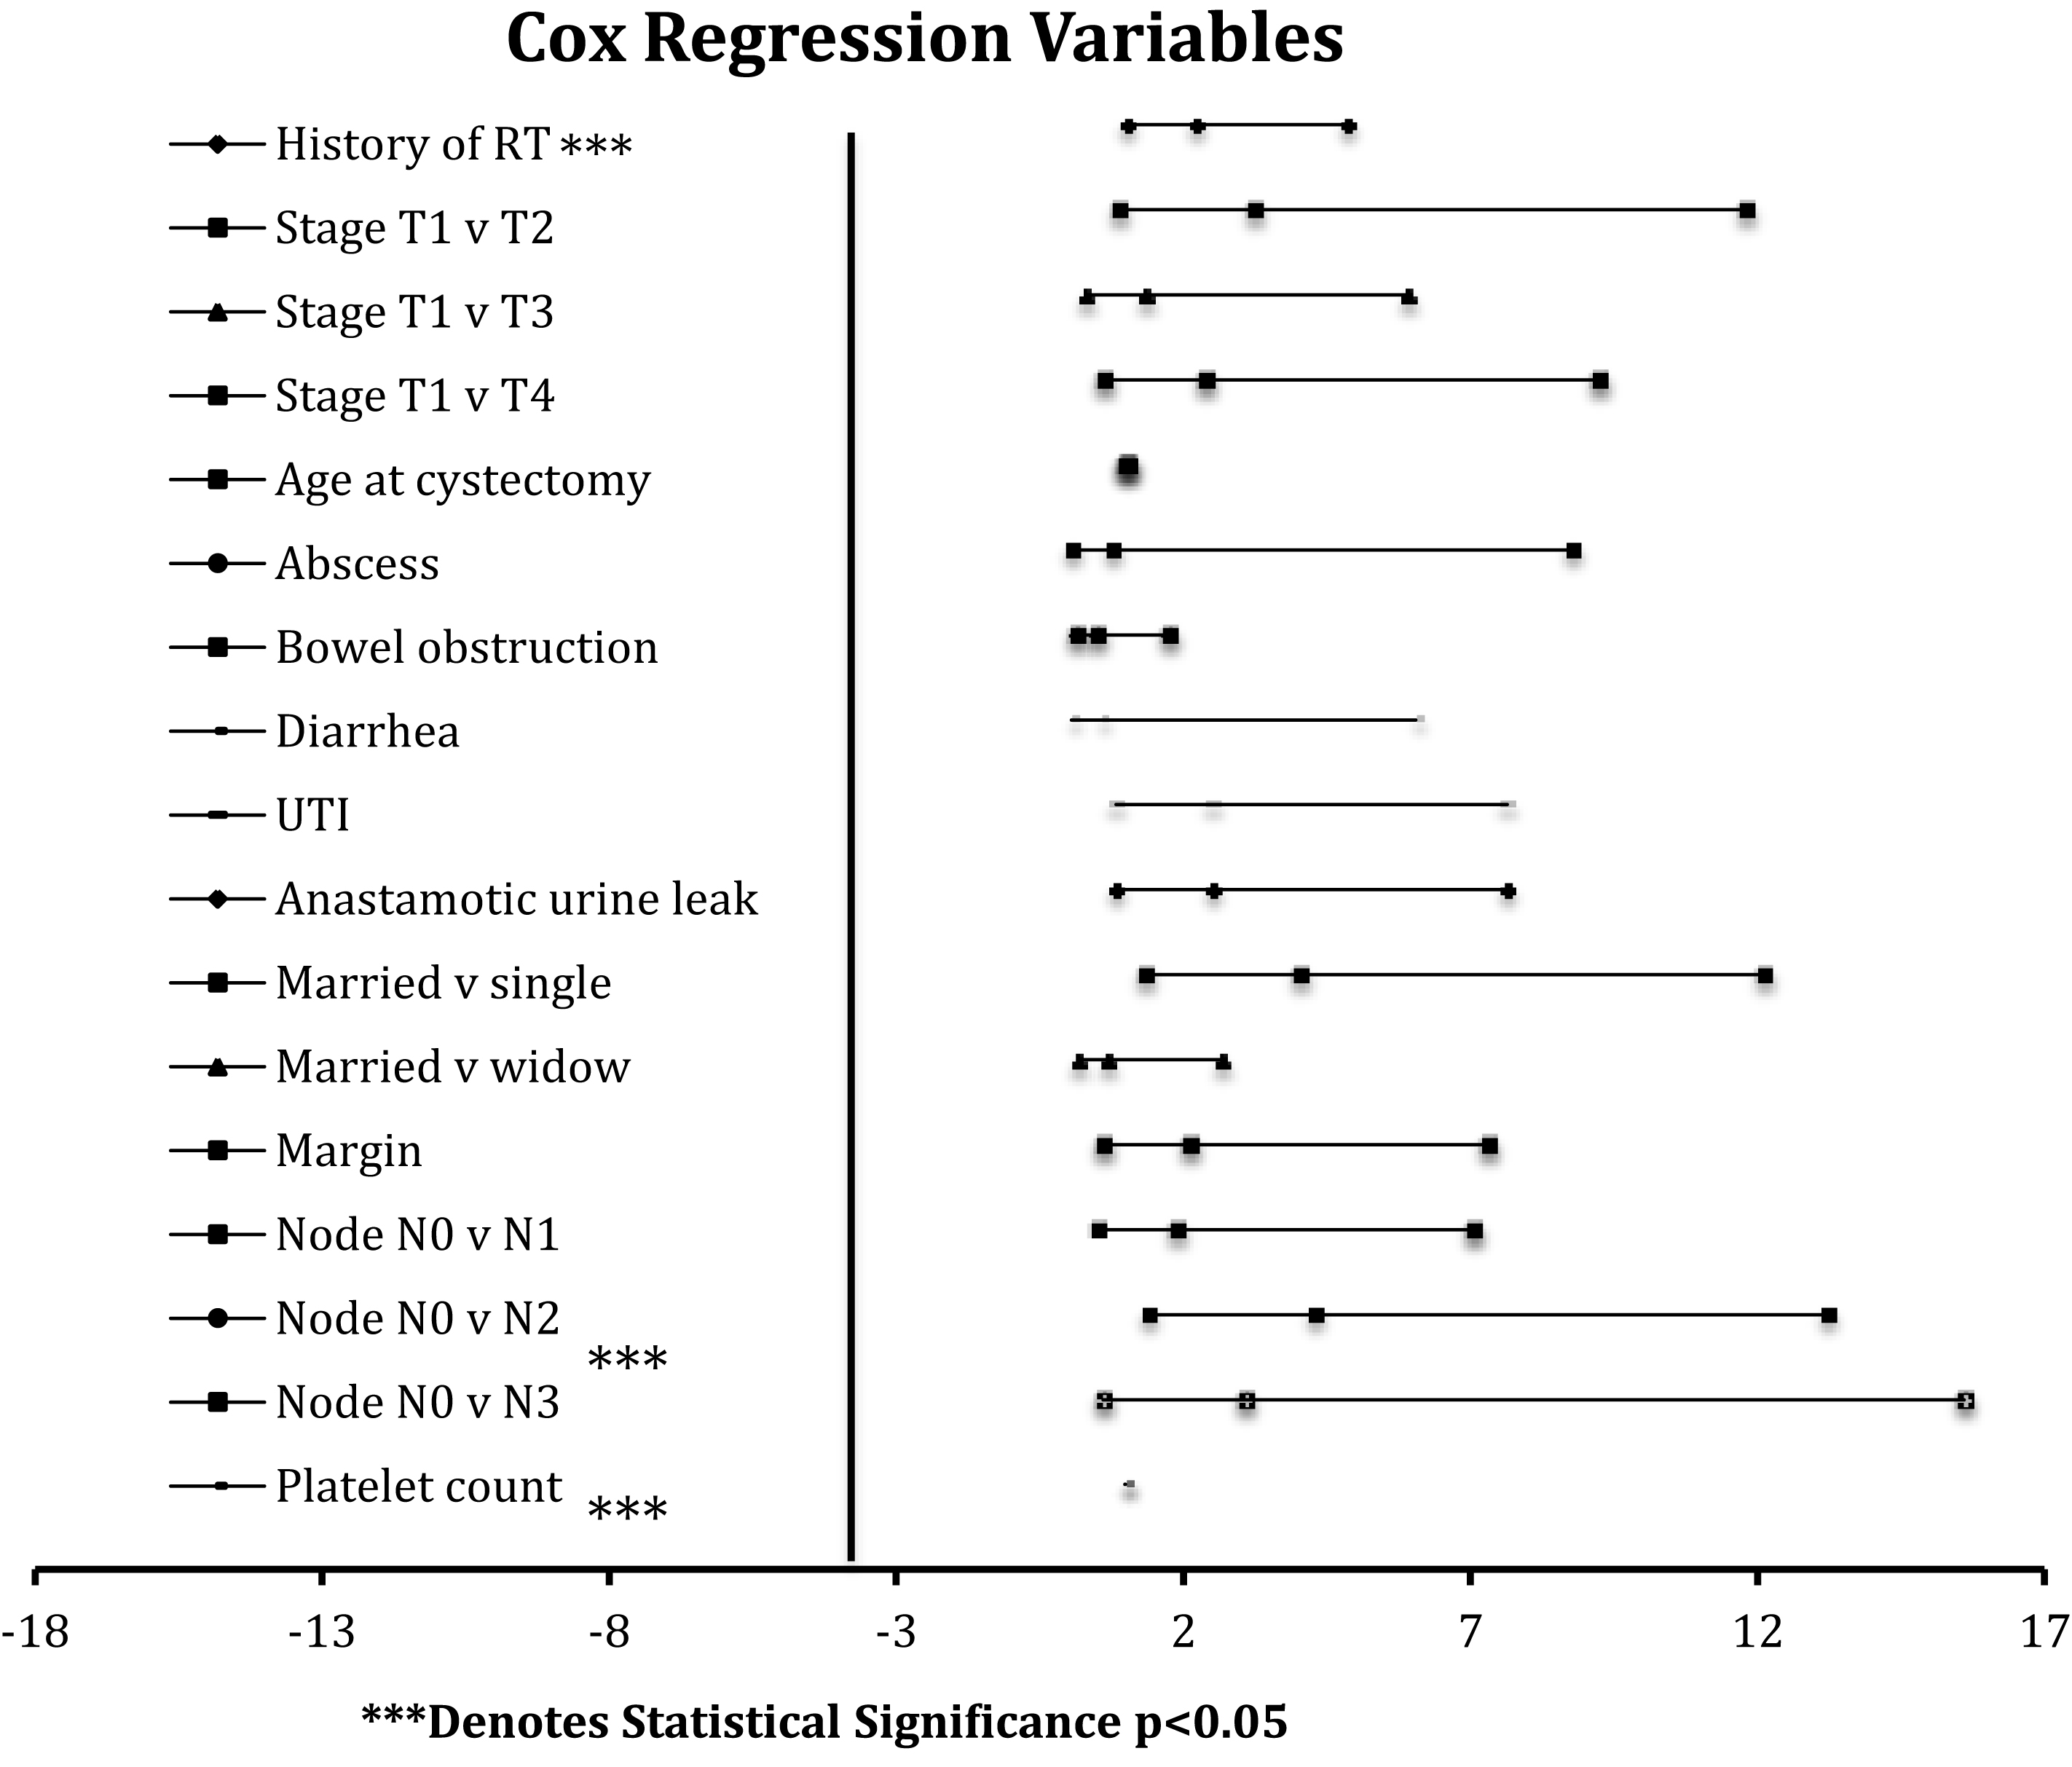 Significant cox regression variables. RT: Radiation therapy. UTI: Urinary tract infection.